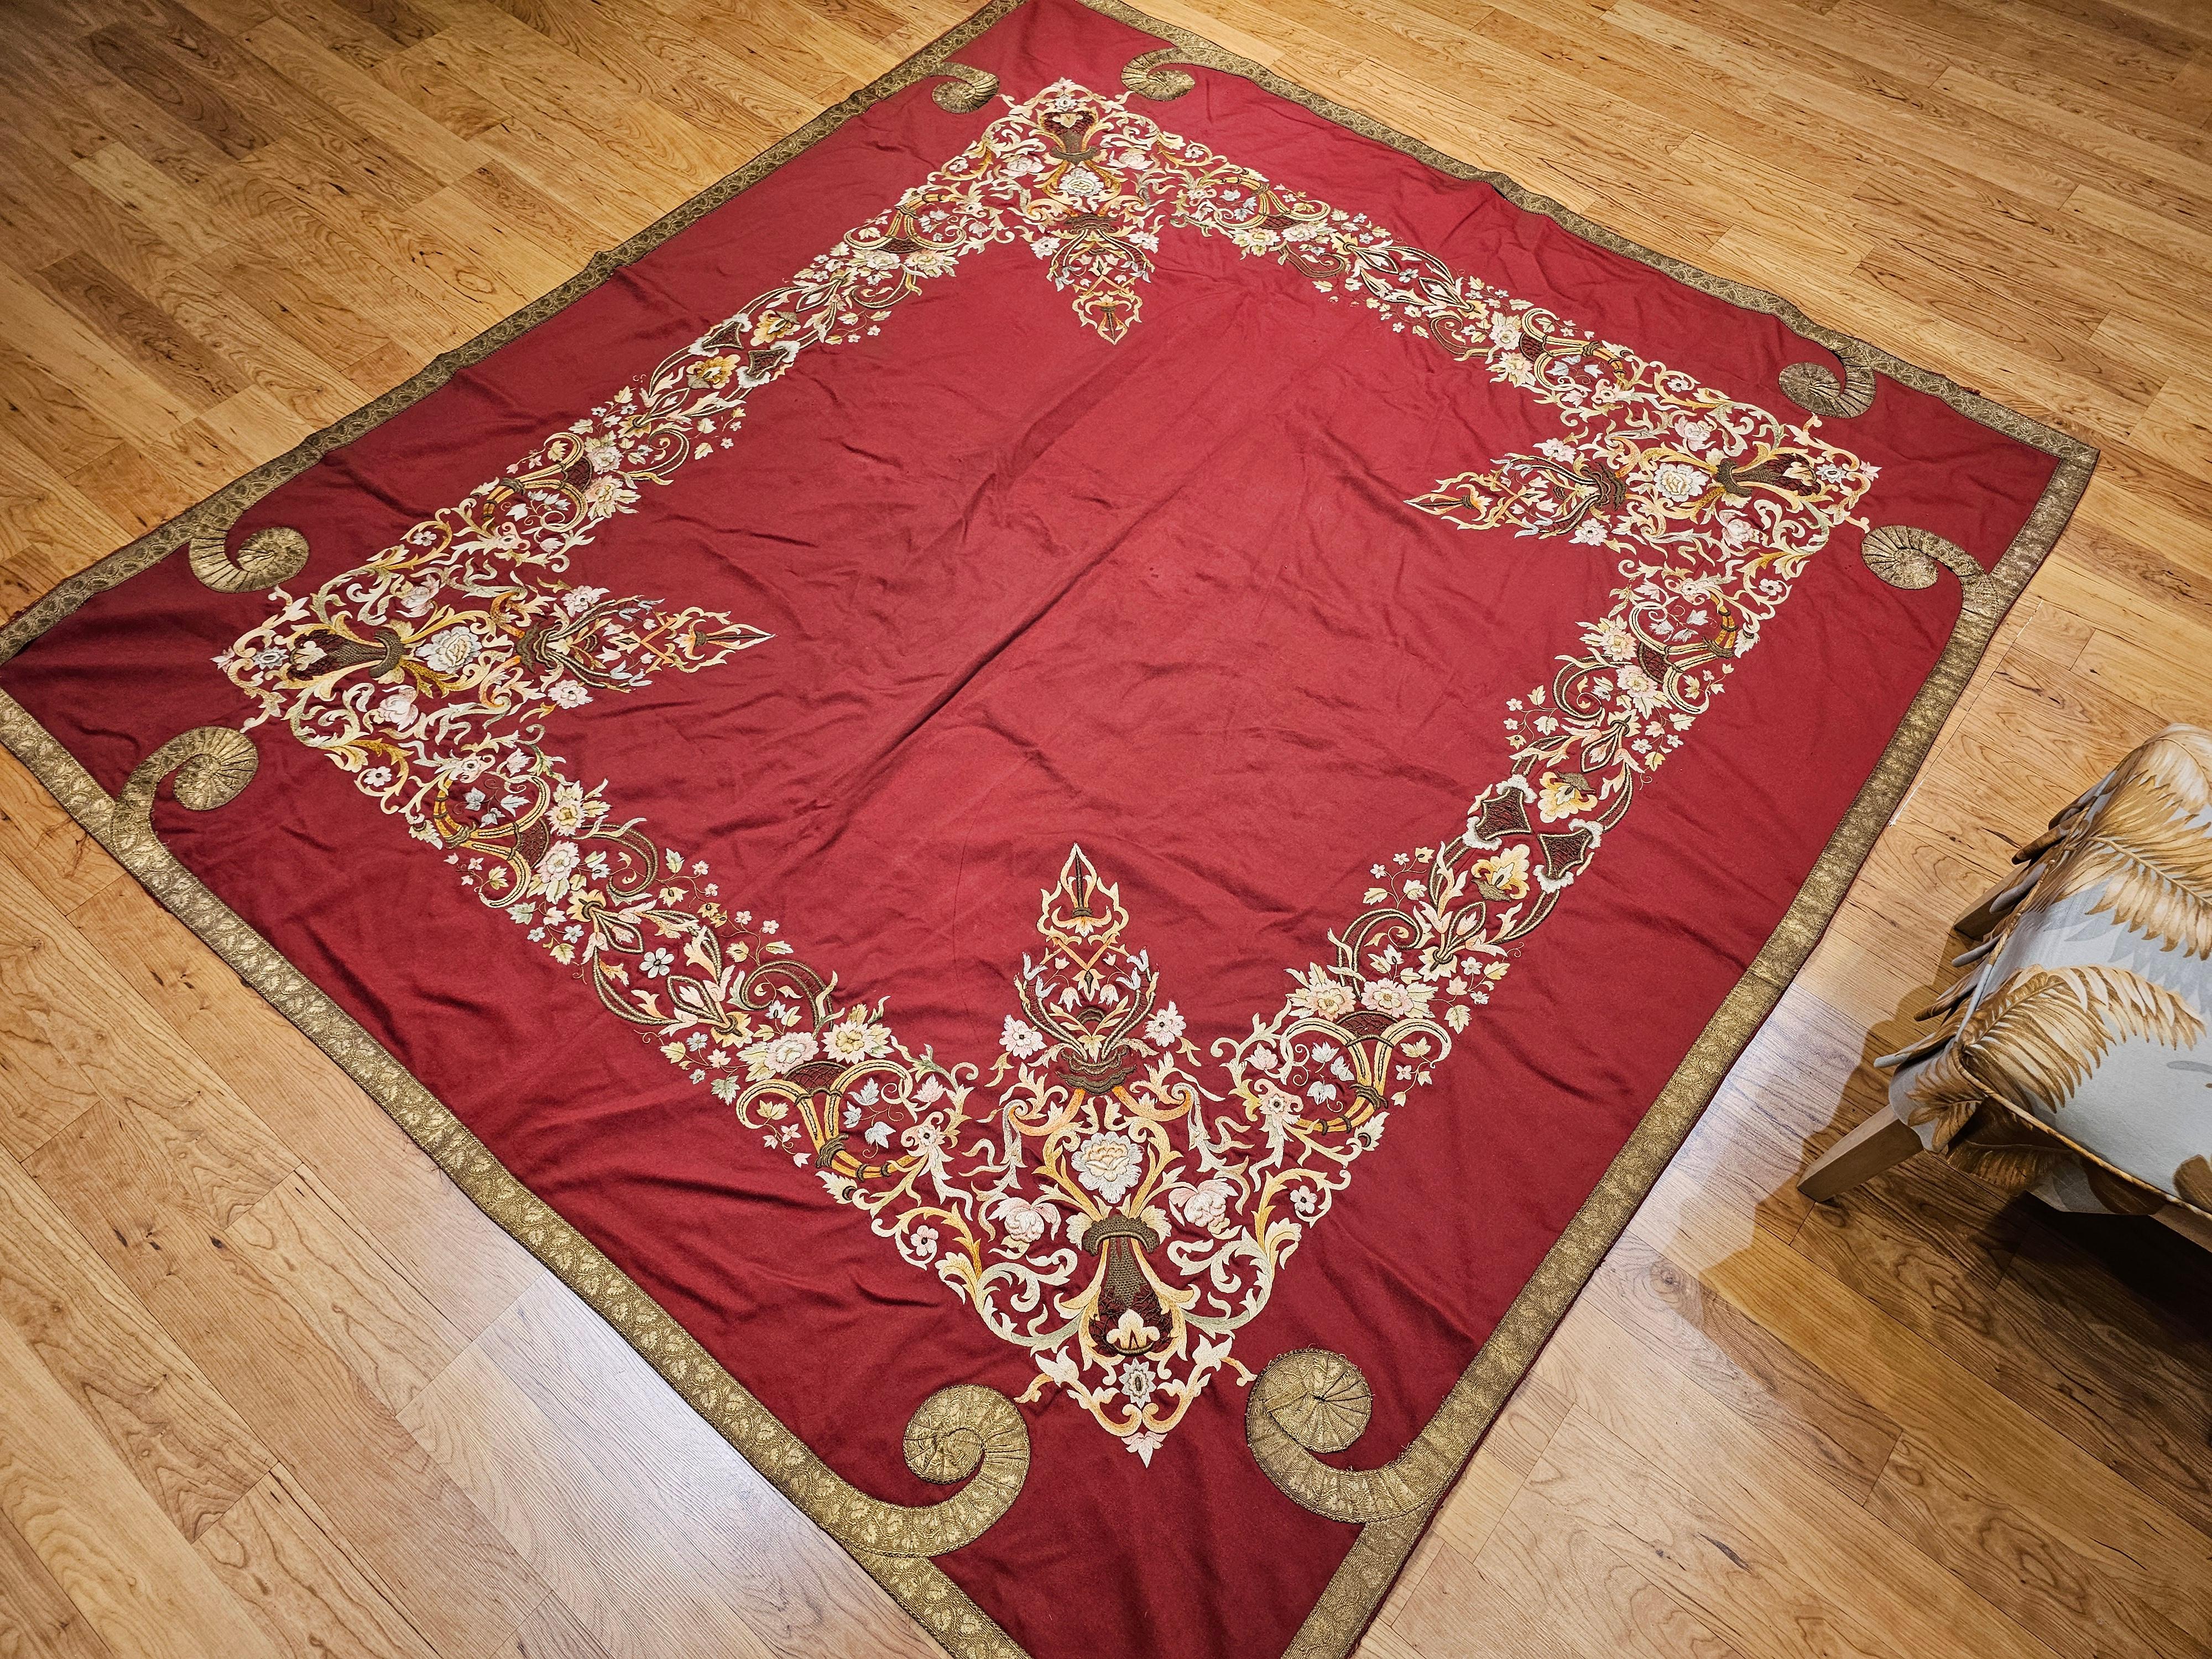 19th Century Ottoman Hand Embroidered Silk and Gilt Threads Tapestry Textile For Sale 6